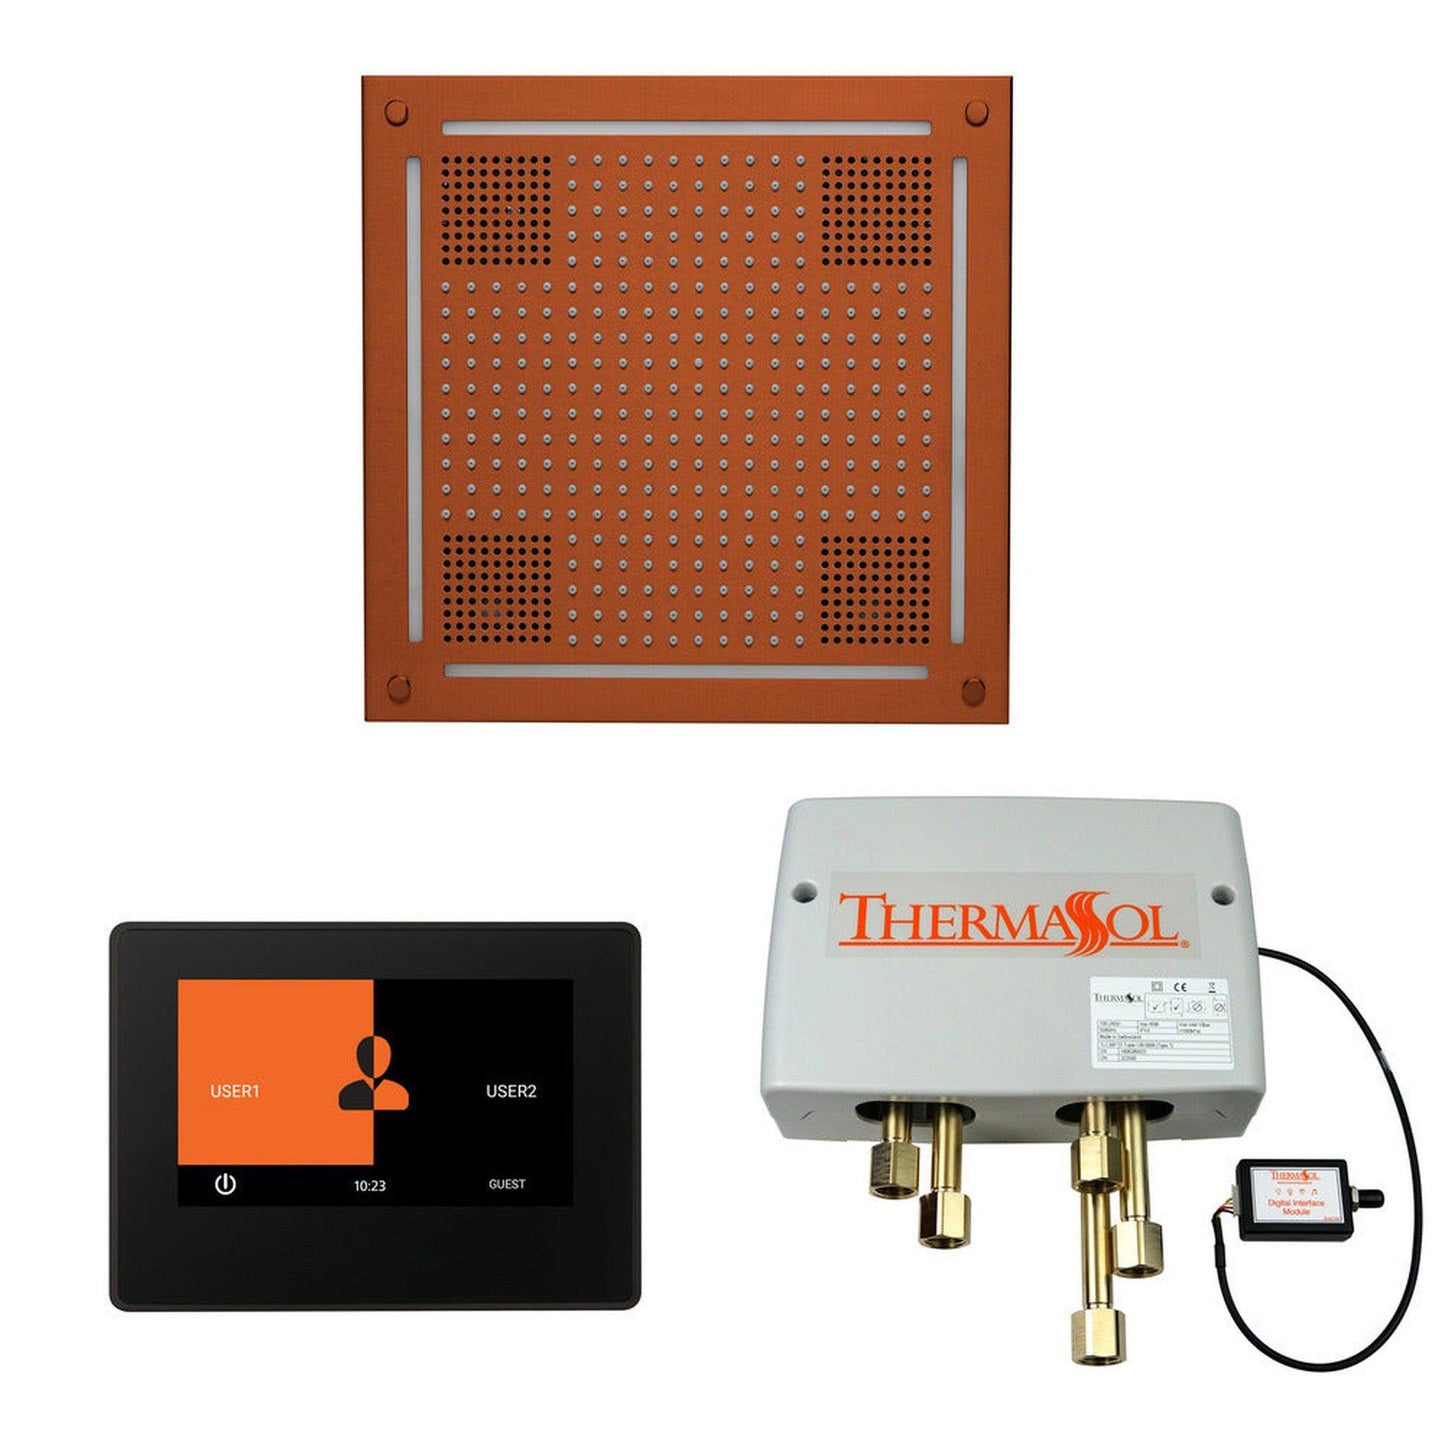 ThermaSol The Wellness Antique Copper Finish Hydrovive Shower Square Package with 7" ThermaTouch